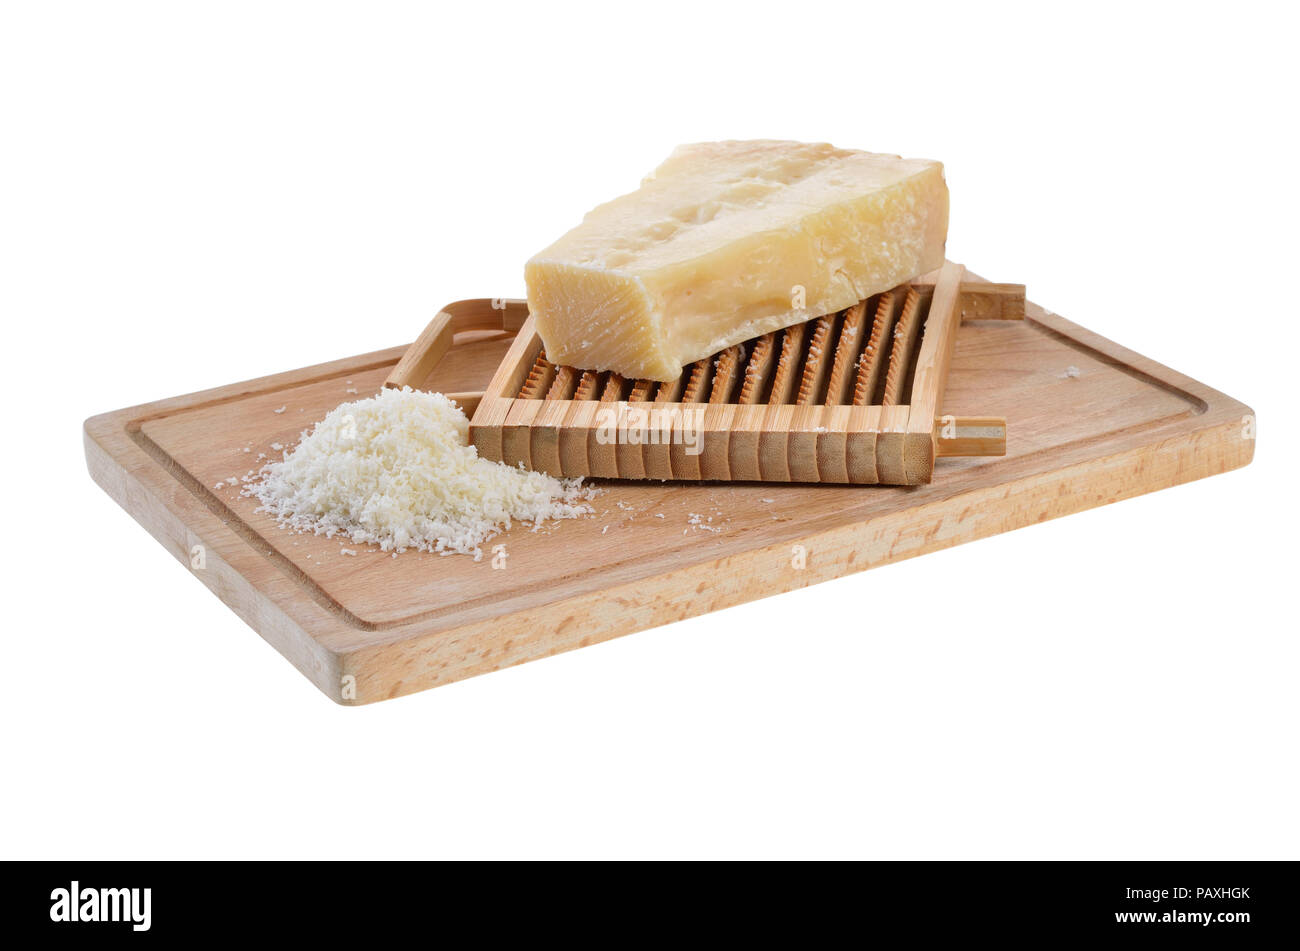 https://c8.alamy.com/comp/PAXHGK/parmesan-cheese-on-a-wooden-cutting-board-with-a-cheese-grater-PAXHGK.jpg